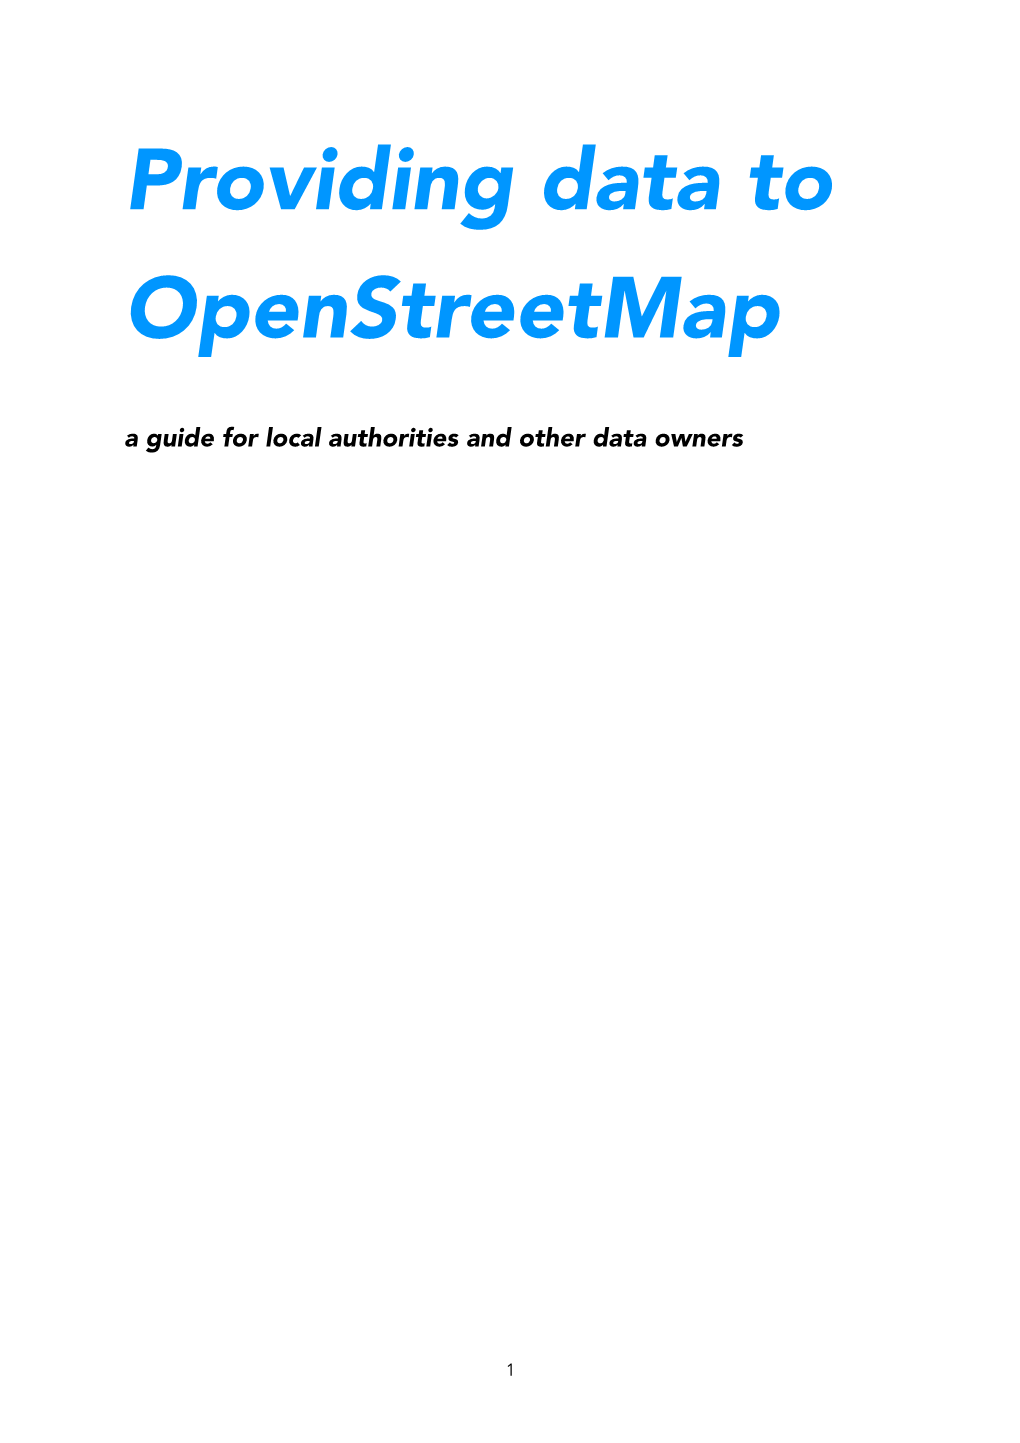 Providing Your Data to Openstreetmap